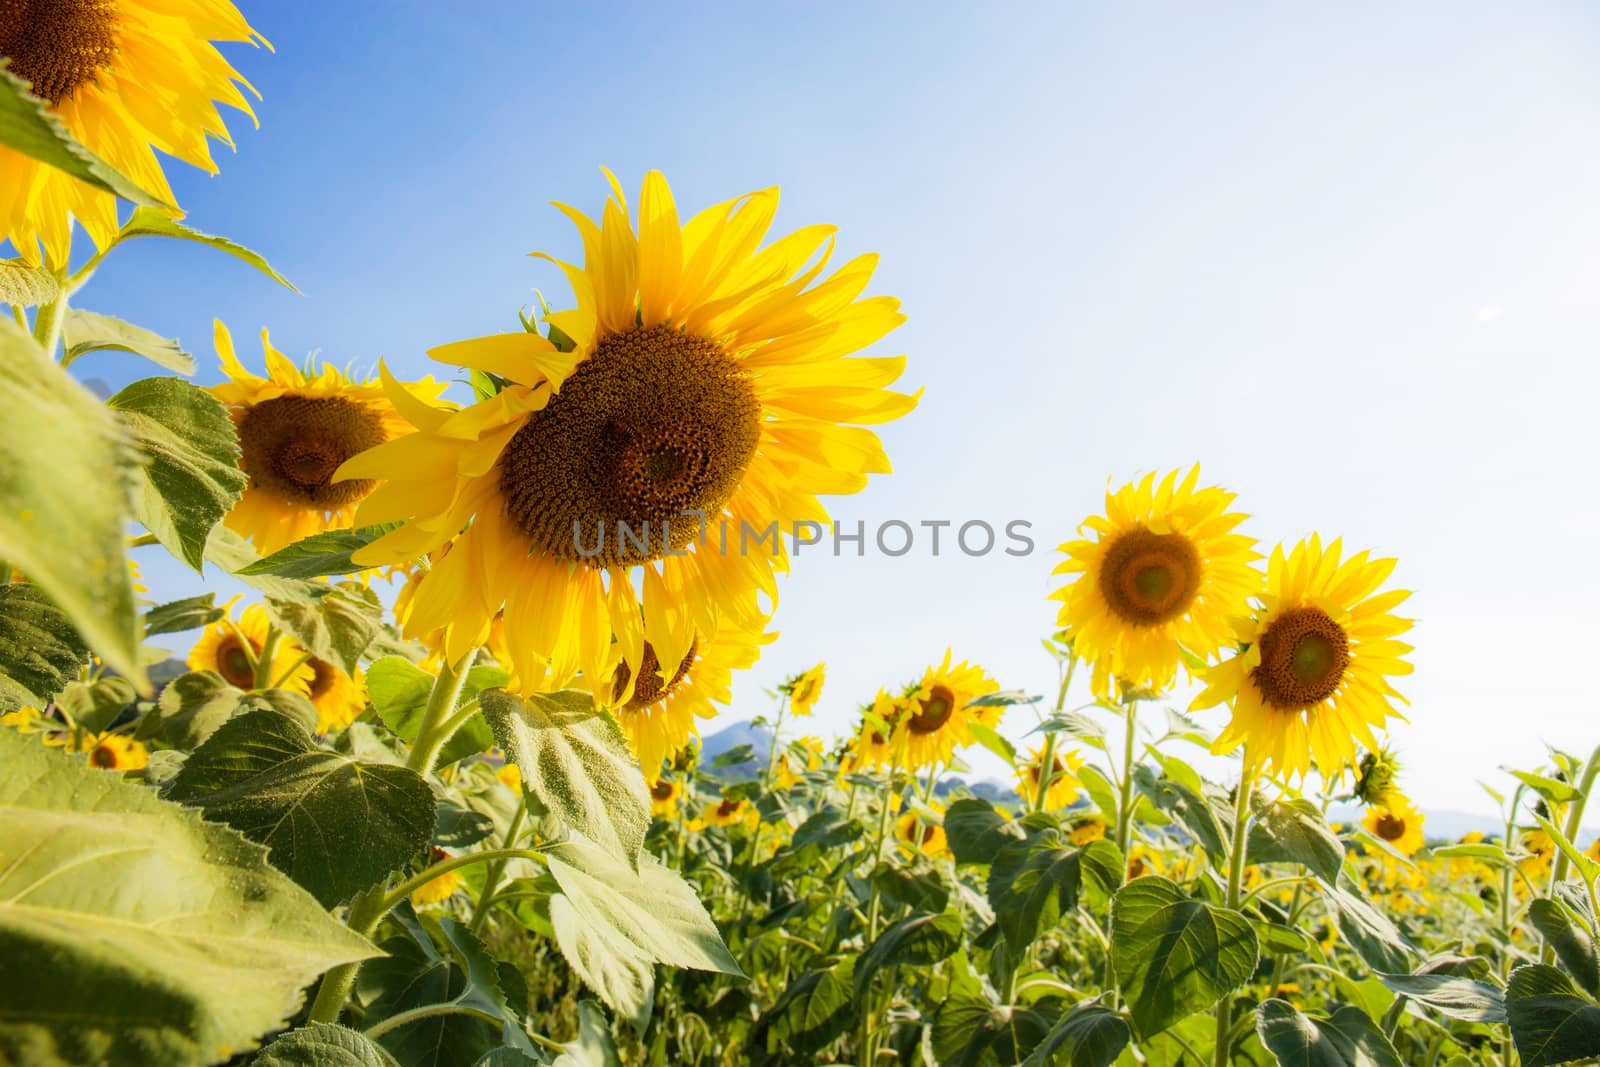 Sunflower on field with the sunlight at blue sky.